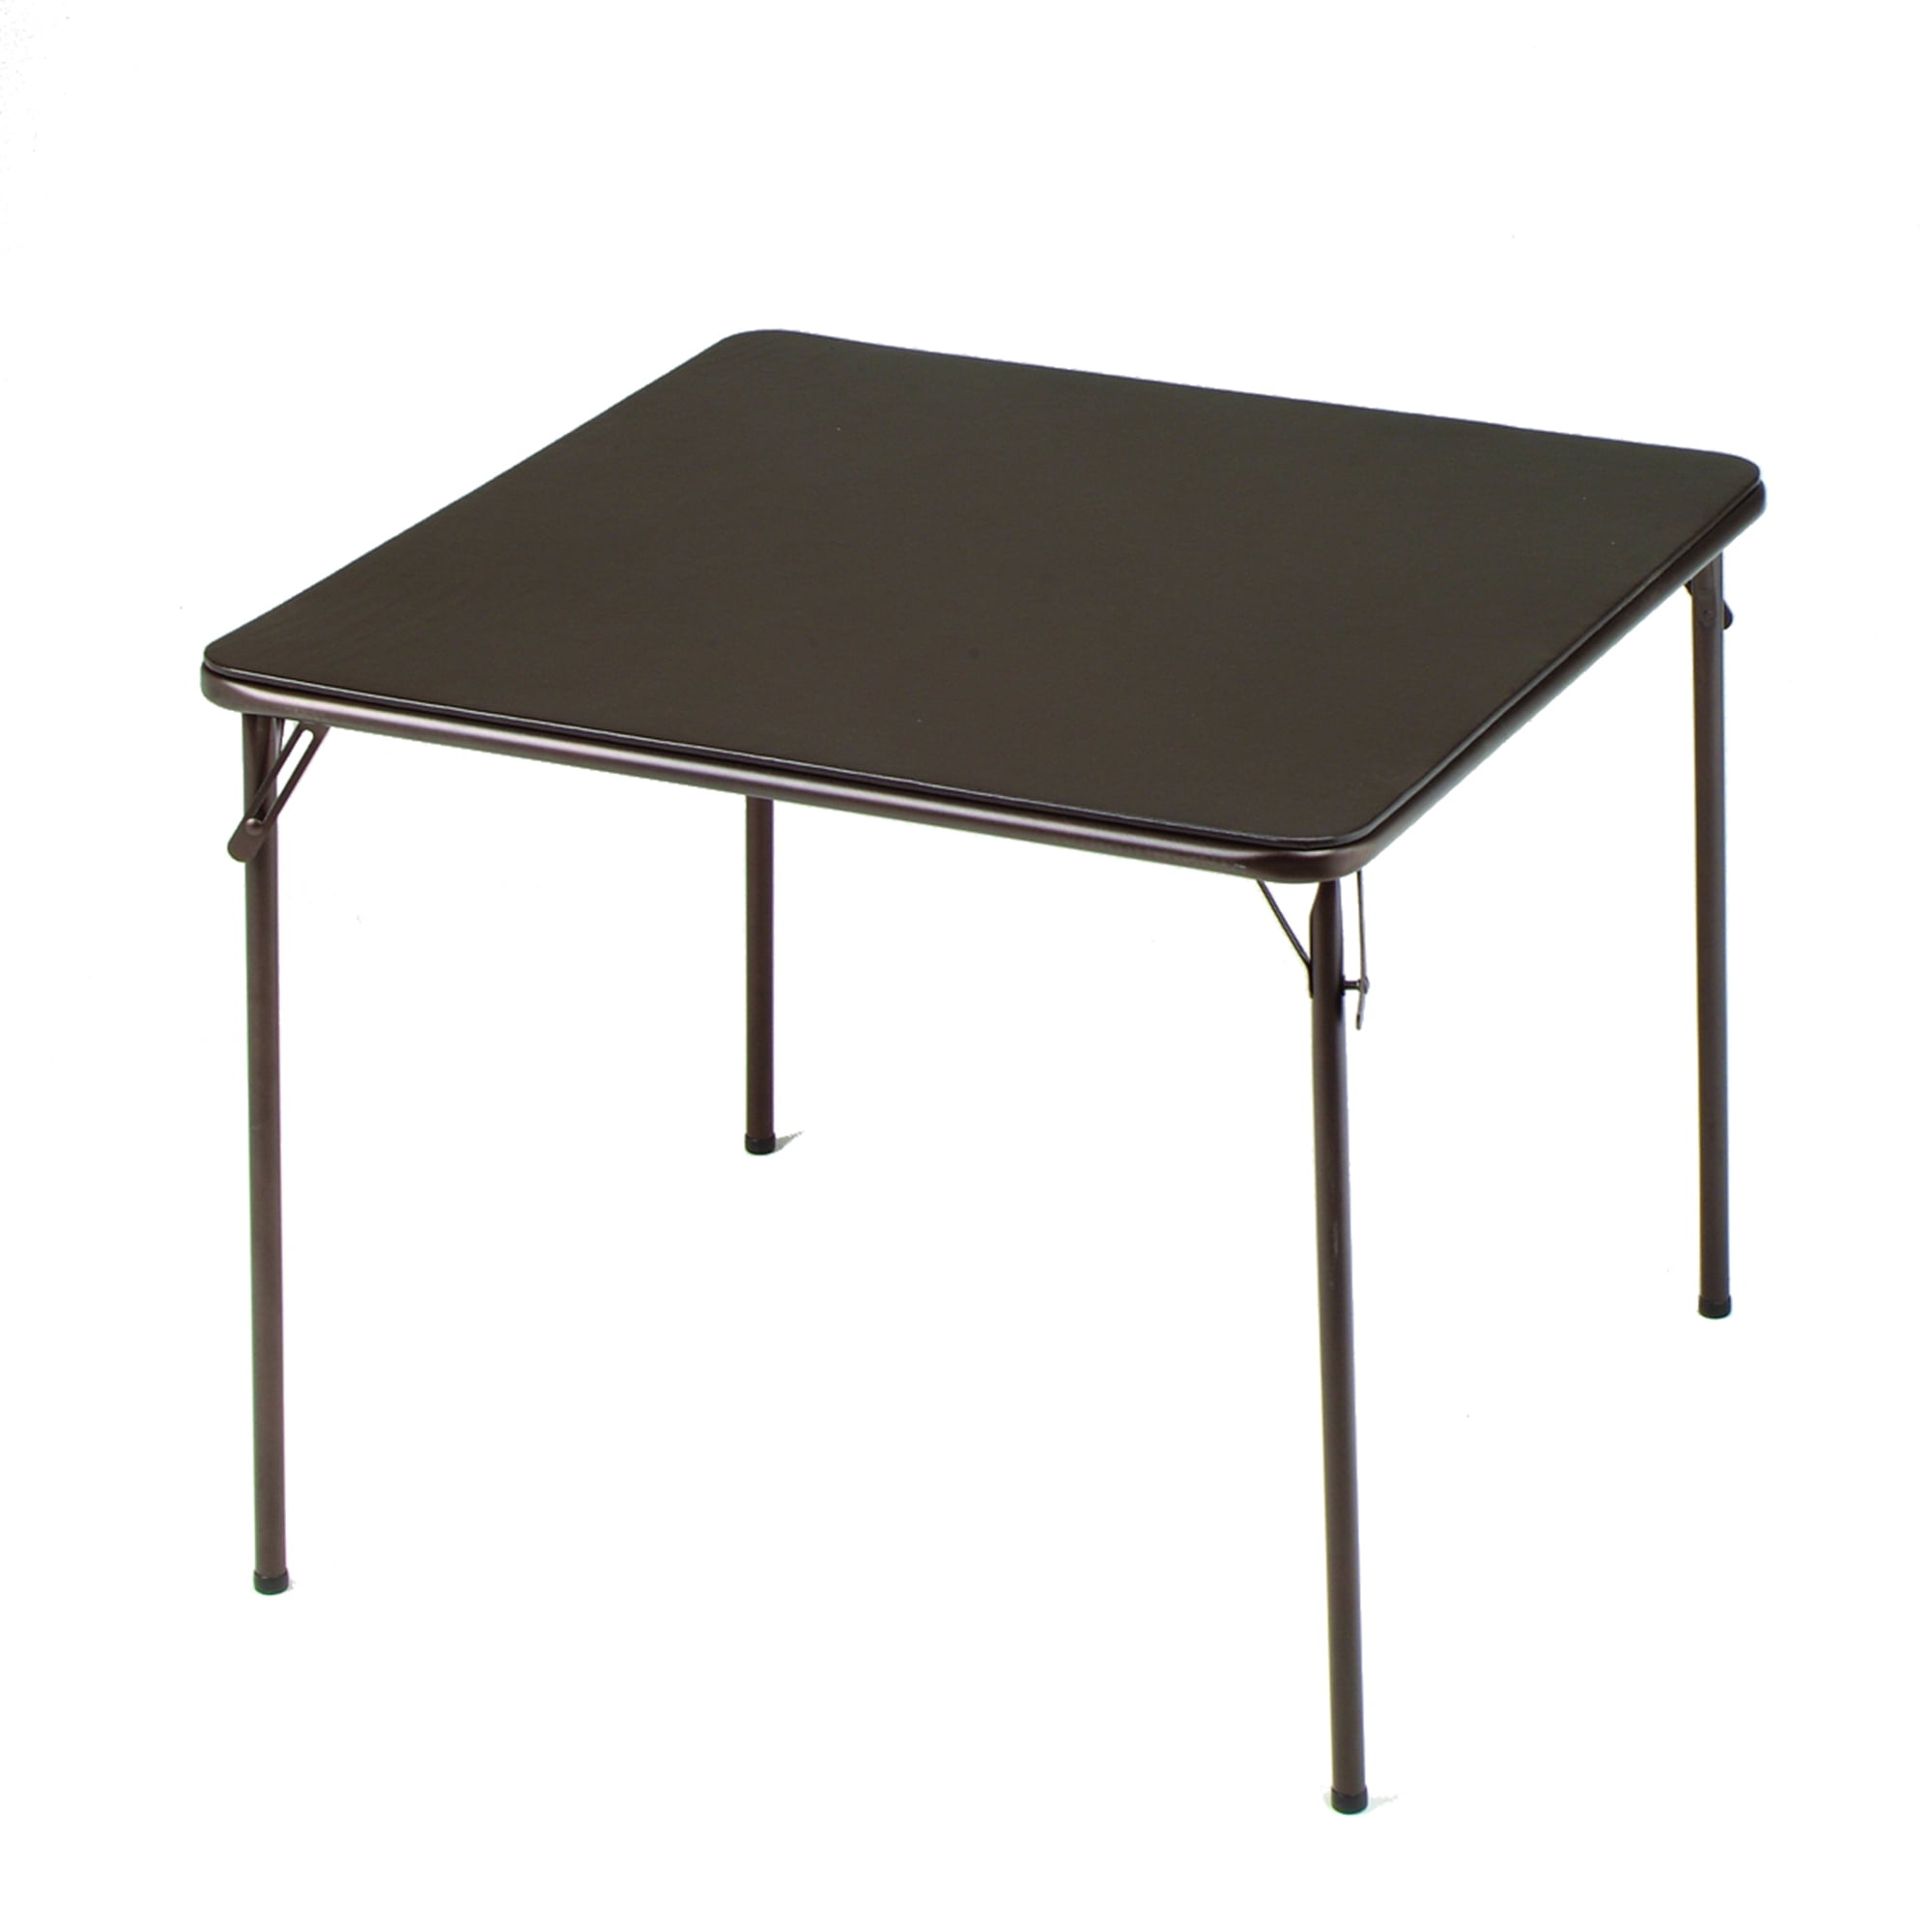 MECO Sudden Comfort 34 x 34 Inch Square Metal Folding Dining Card Table Buff 